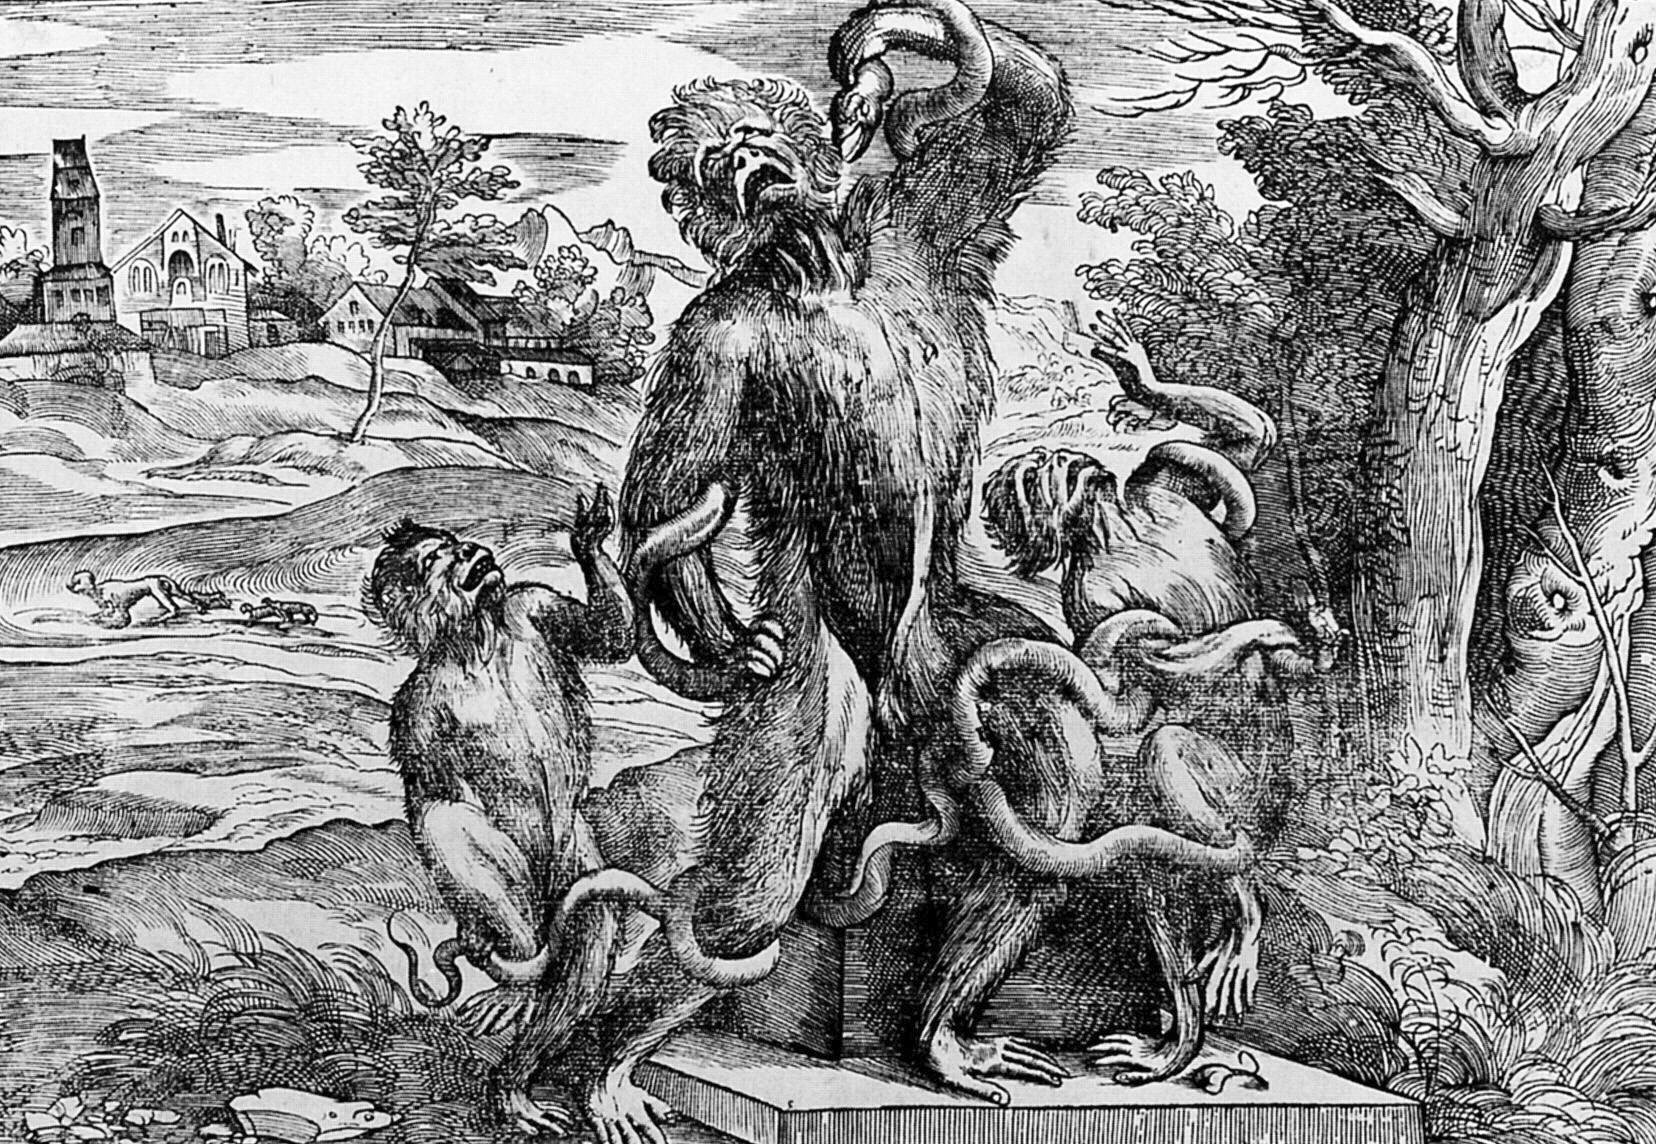 Caricature_of_the_Laocoon_group_as_apes